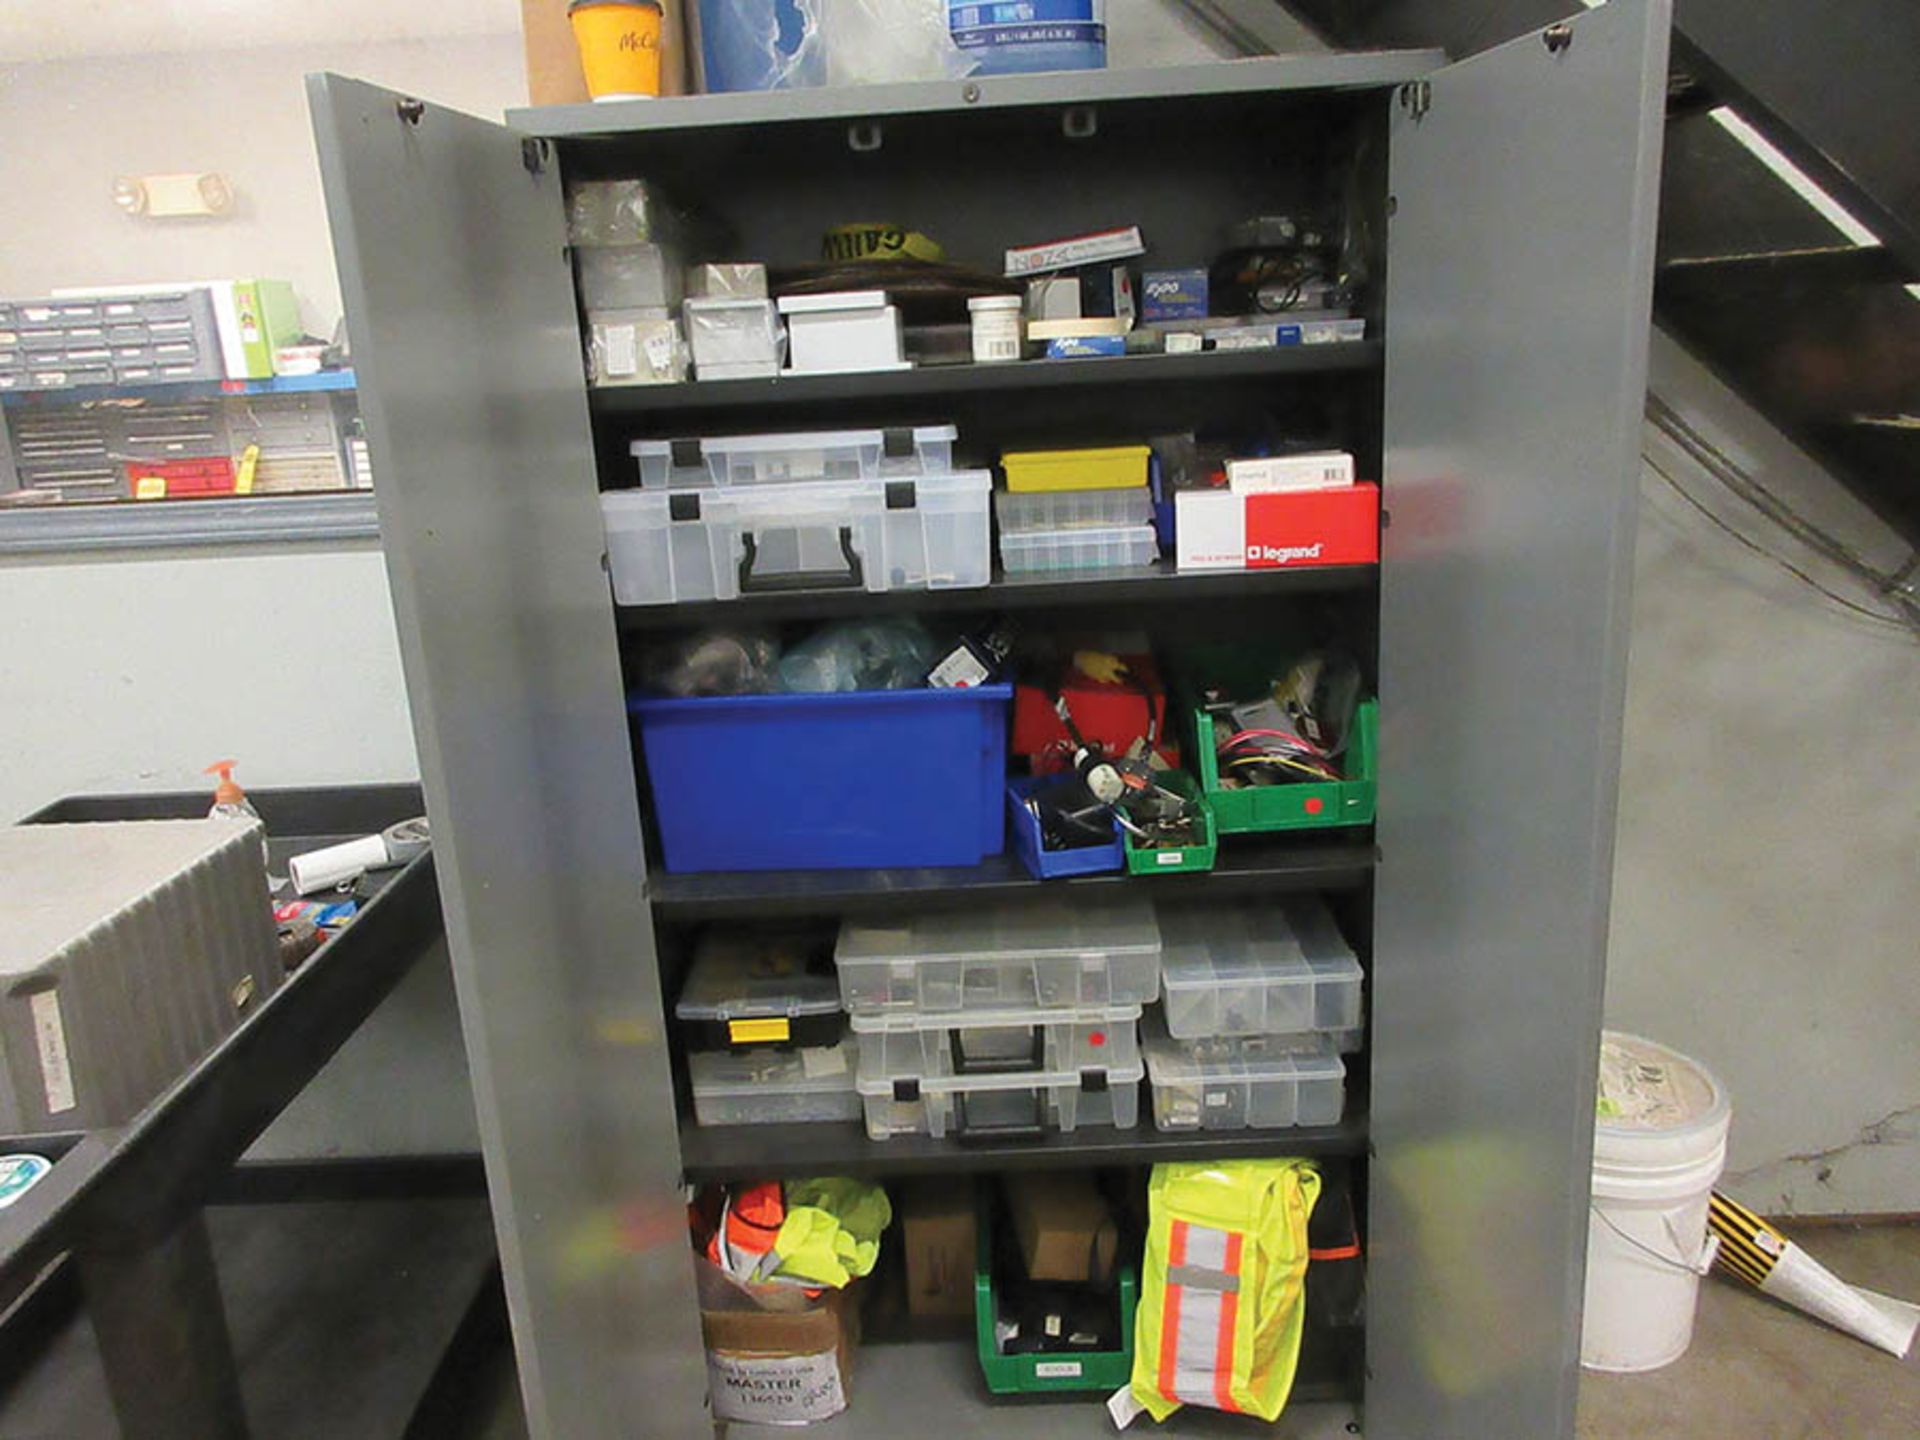 (6) METRO RACKS, (3) 2-DOOR CABINETS W/ CONTENTS OF PREPARED INVENTORY AND CLEANING PRODUCTS - Image 11 of 13